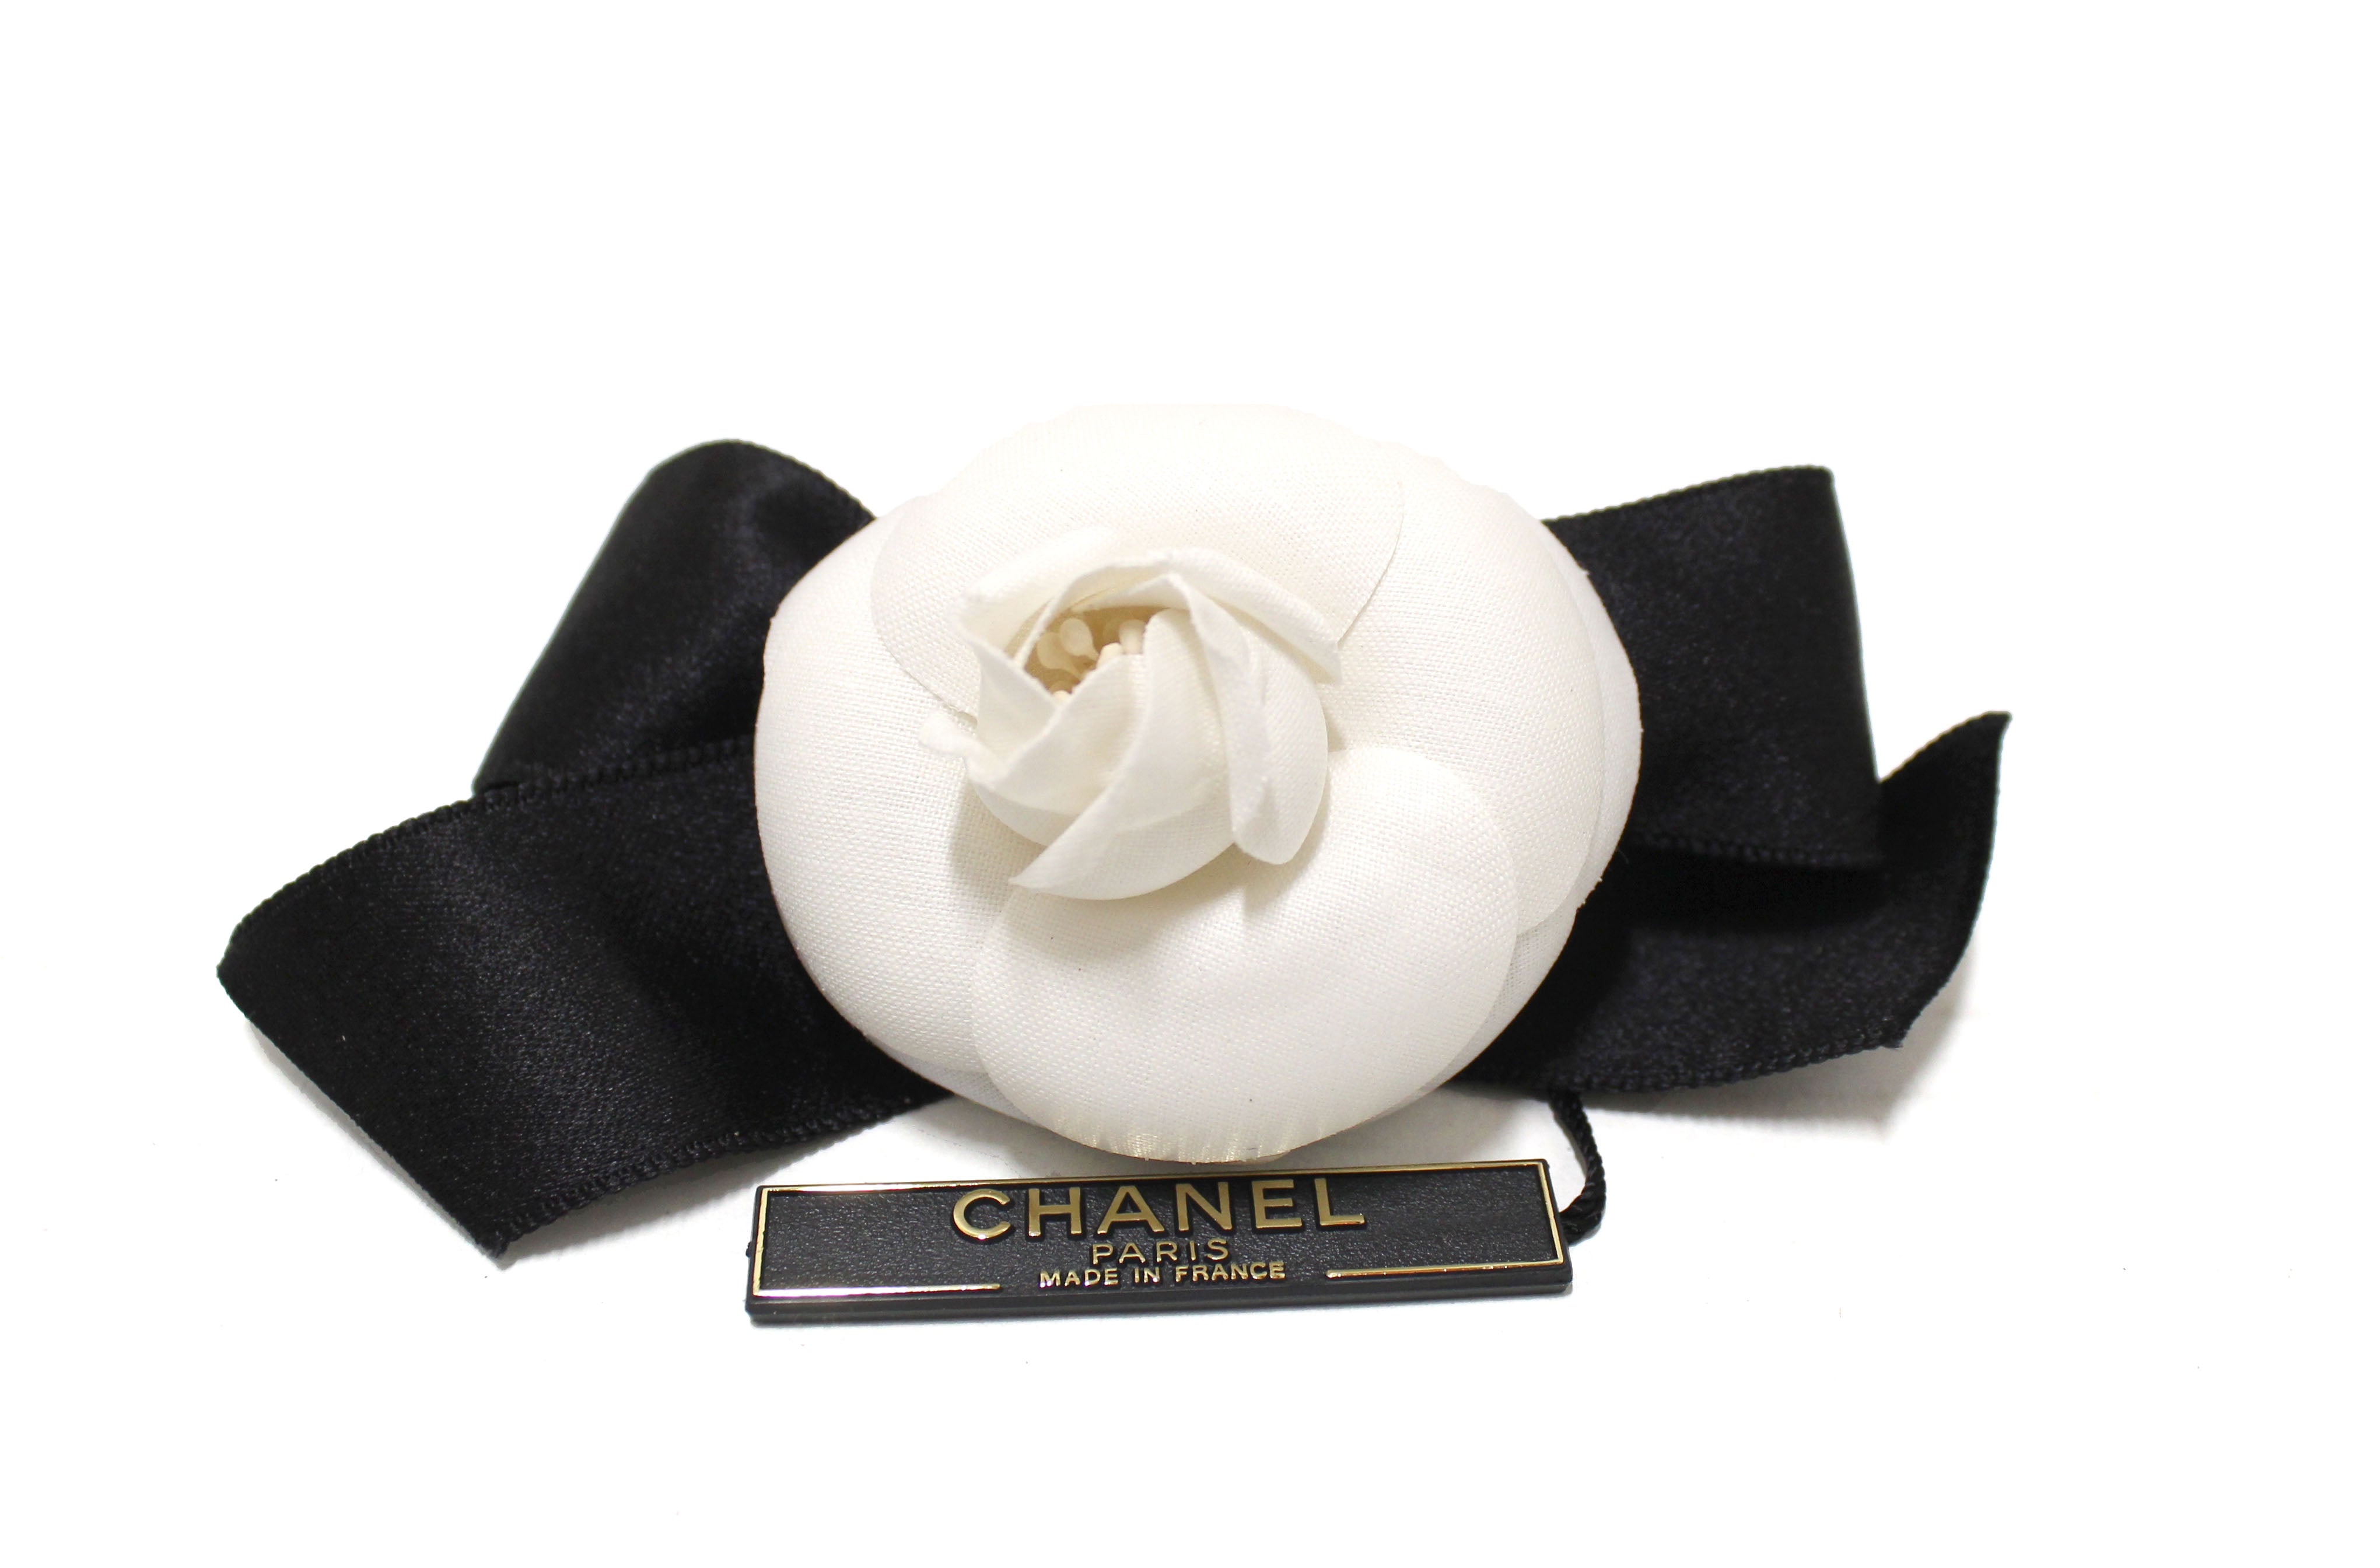 CHANEL, BLACK AND OFF-WHITE TANK TOP AND SKIRT WITH CAMELLIA BROOCH, Chanel: Handbags and Accessories, 2020